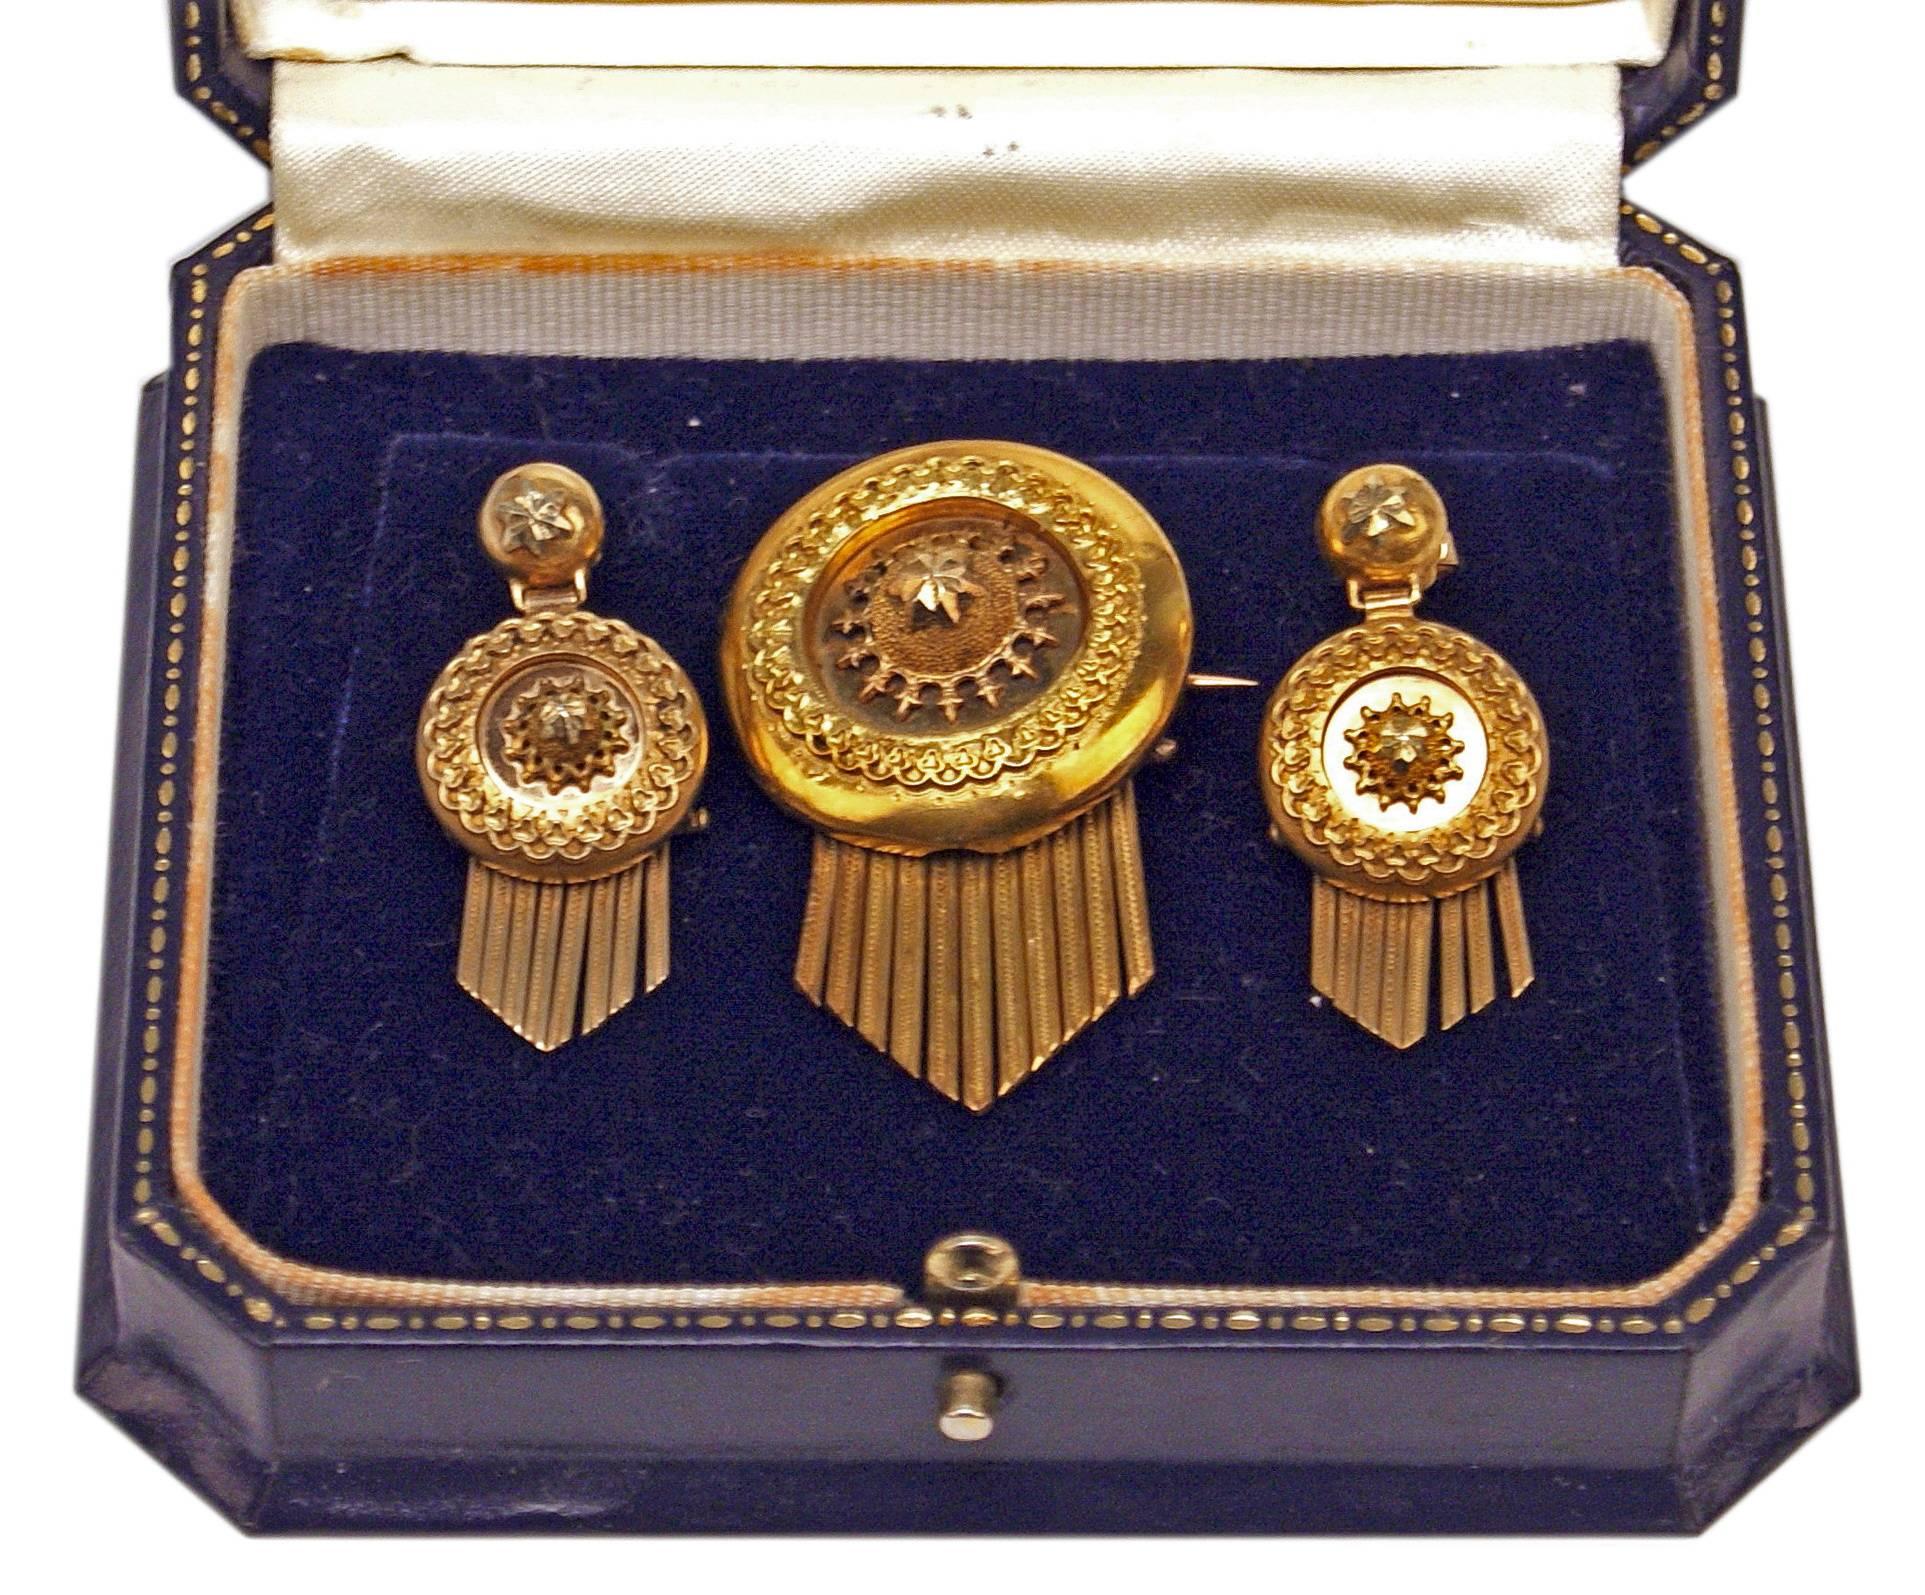 HIGH VICTORIAN (= VIENNESE HISTORICISM) GOLDEN JEWELRY SET:
PAIR OF EARDROPS AND BROOCH MADE OF GOLD 14ct.

ELEGANT BROOCH:
made of GOLD  (14 ct / 585), having round form, additionally decorated with small movable rods attached to area below -